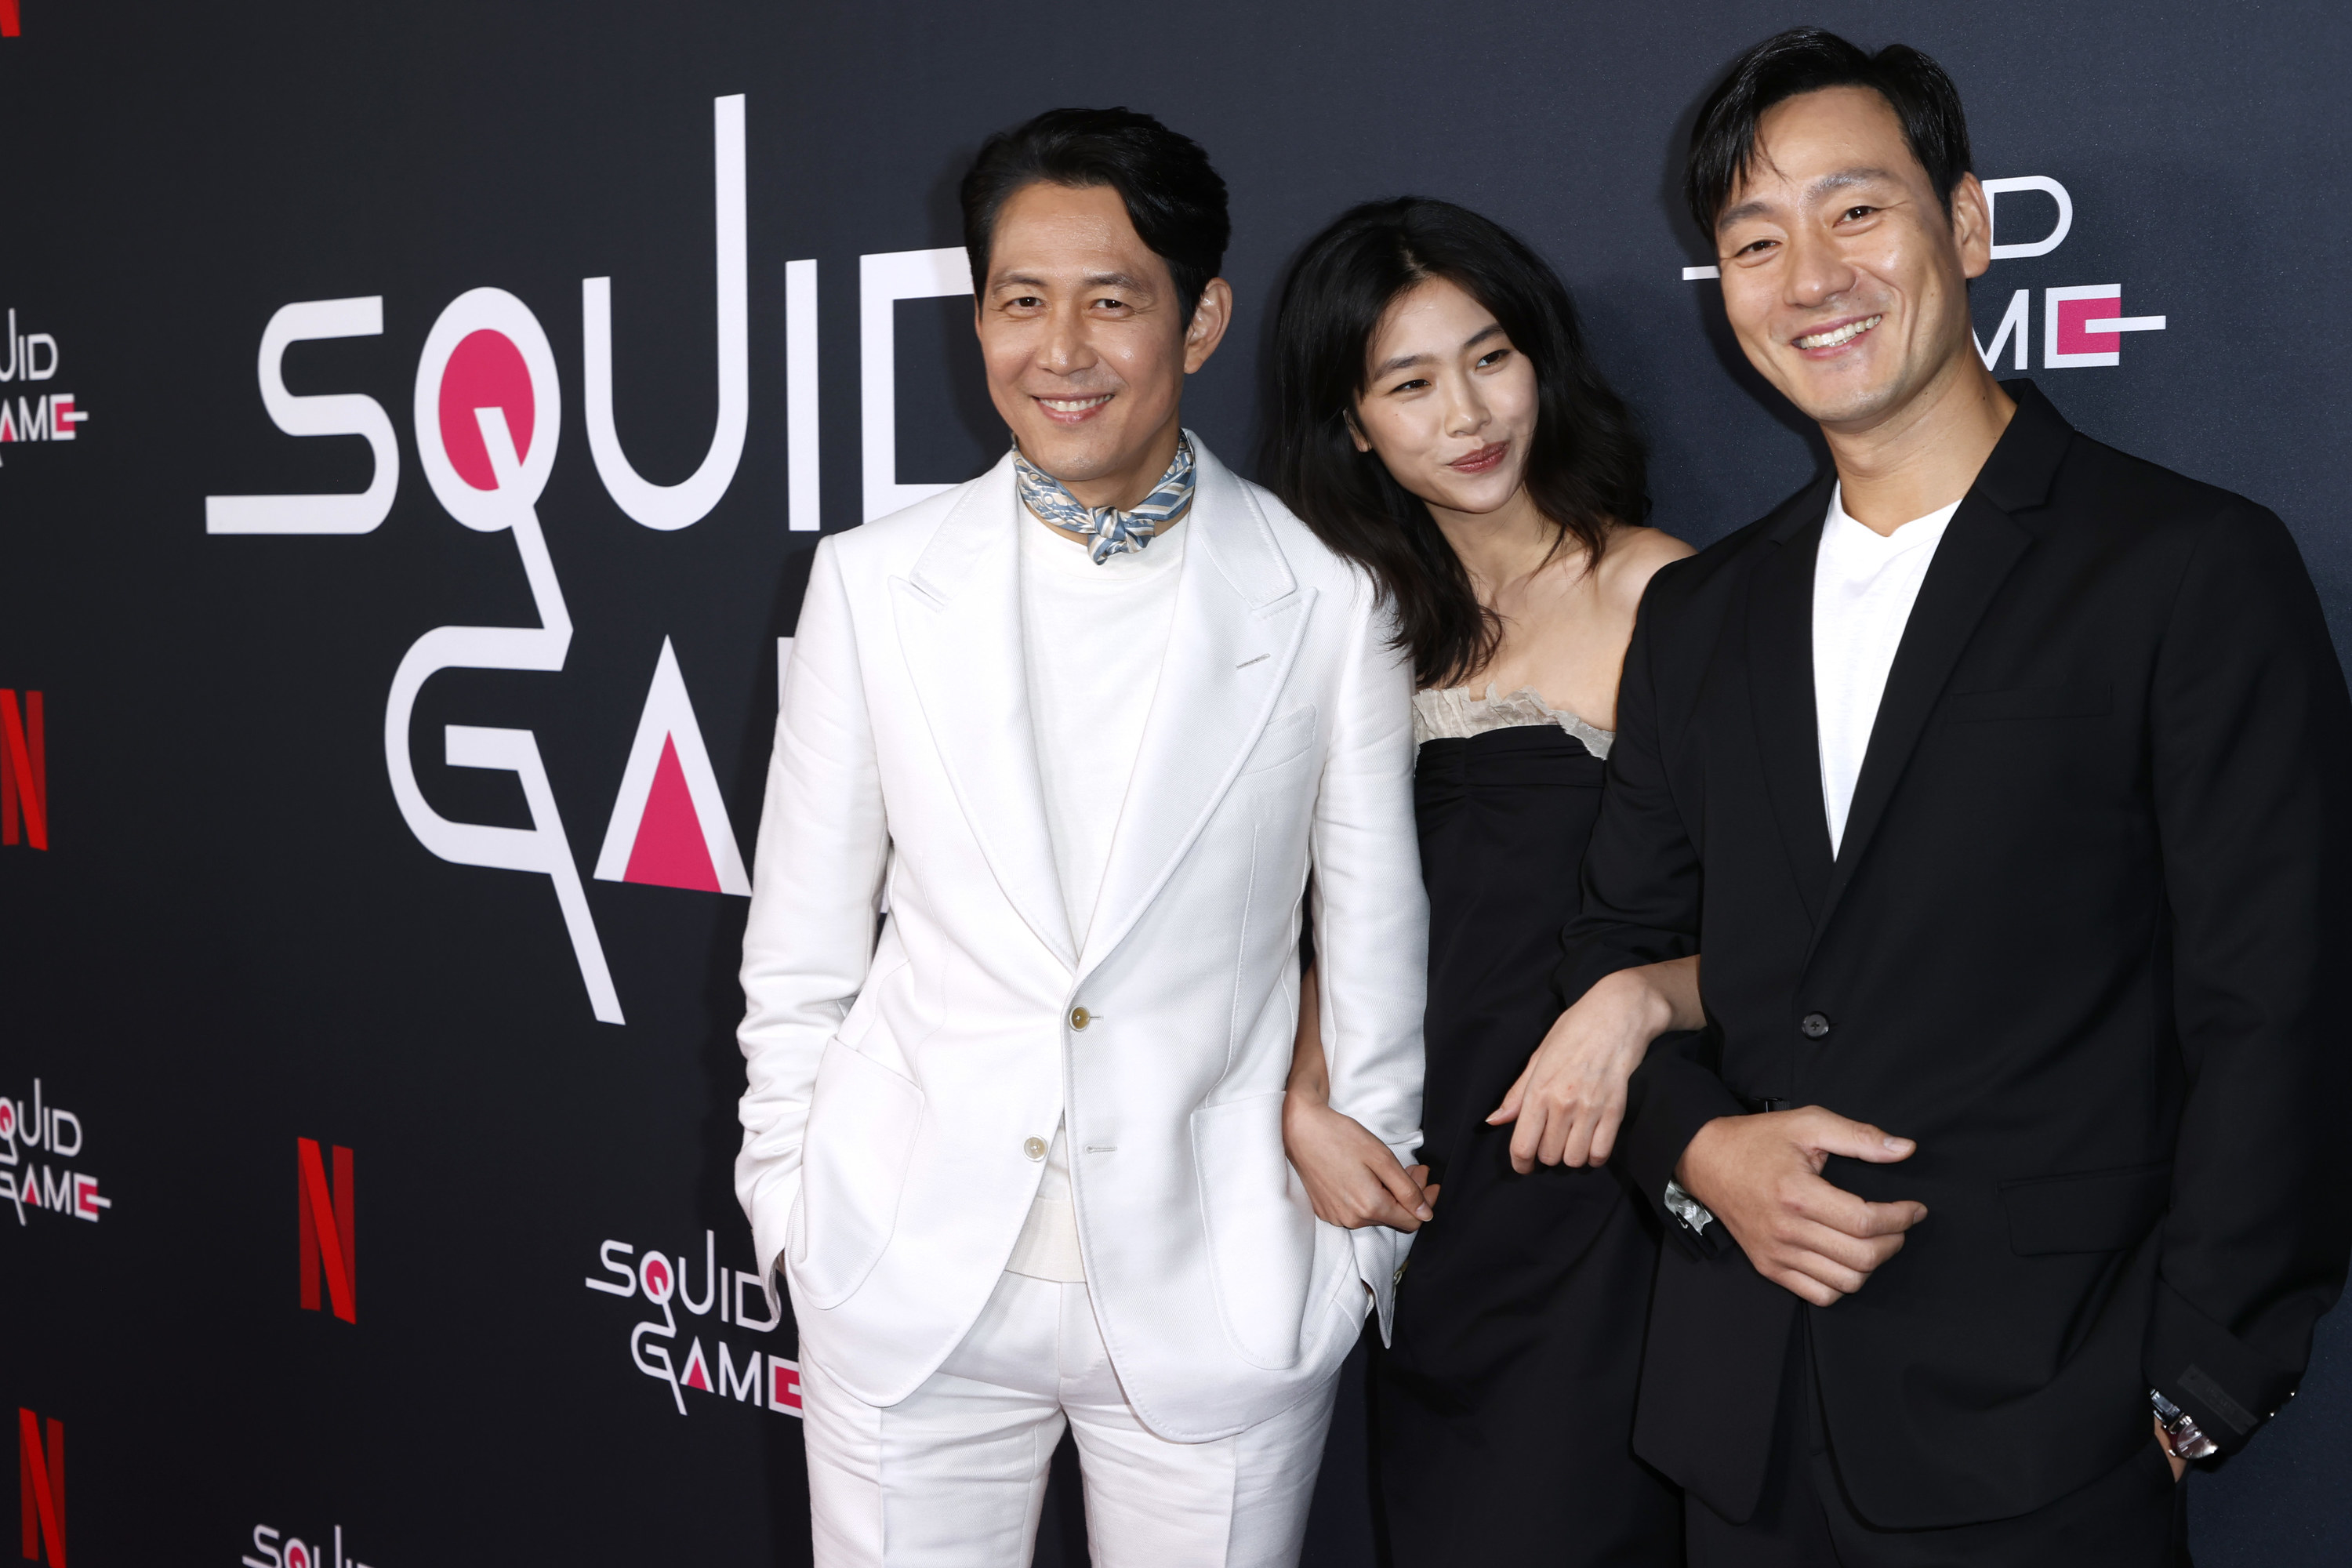 Lee Jung-jae wearing the outfit